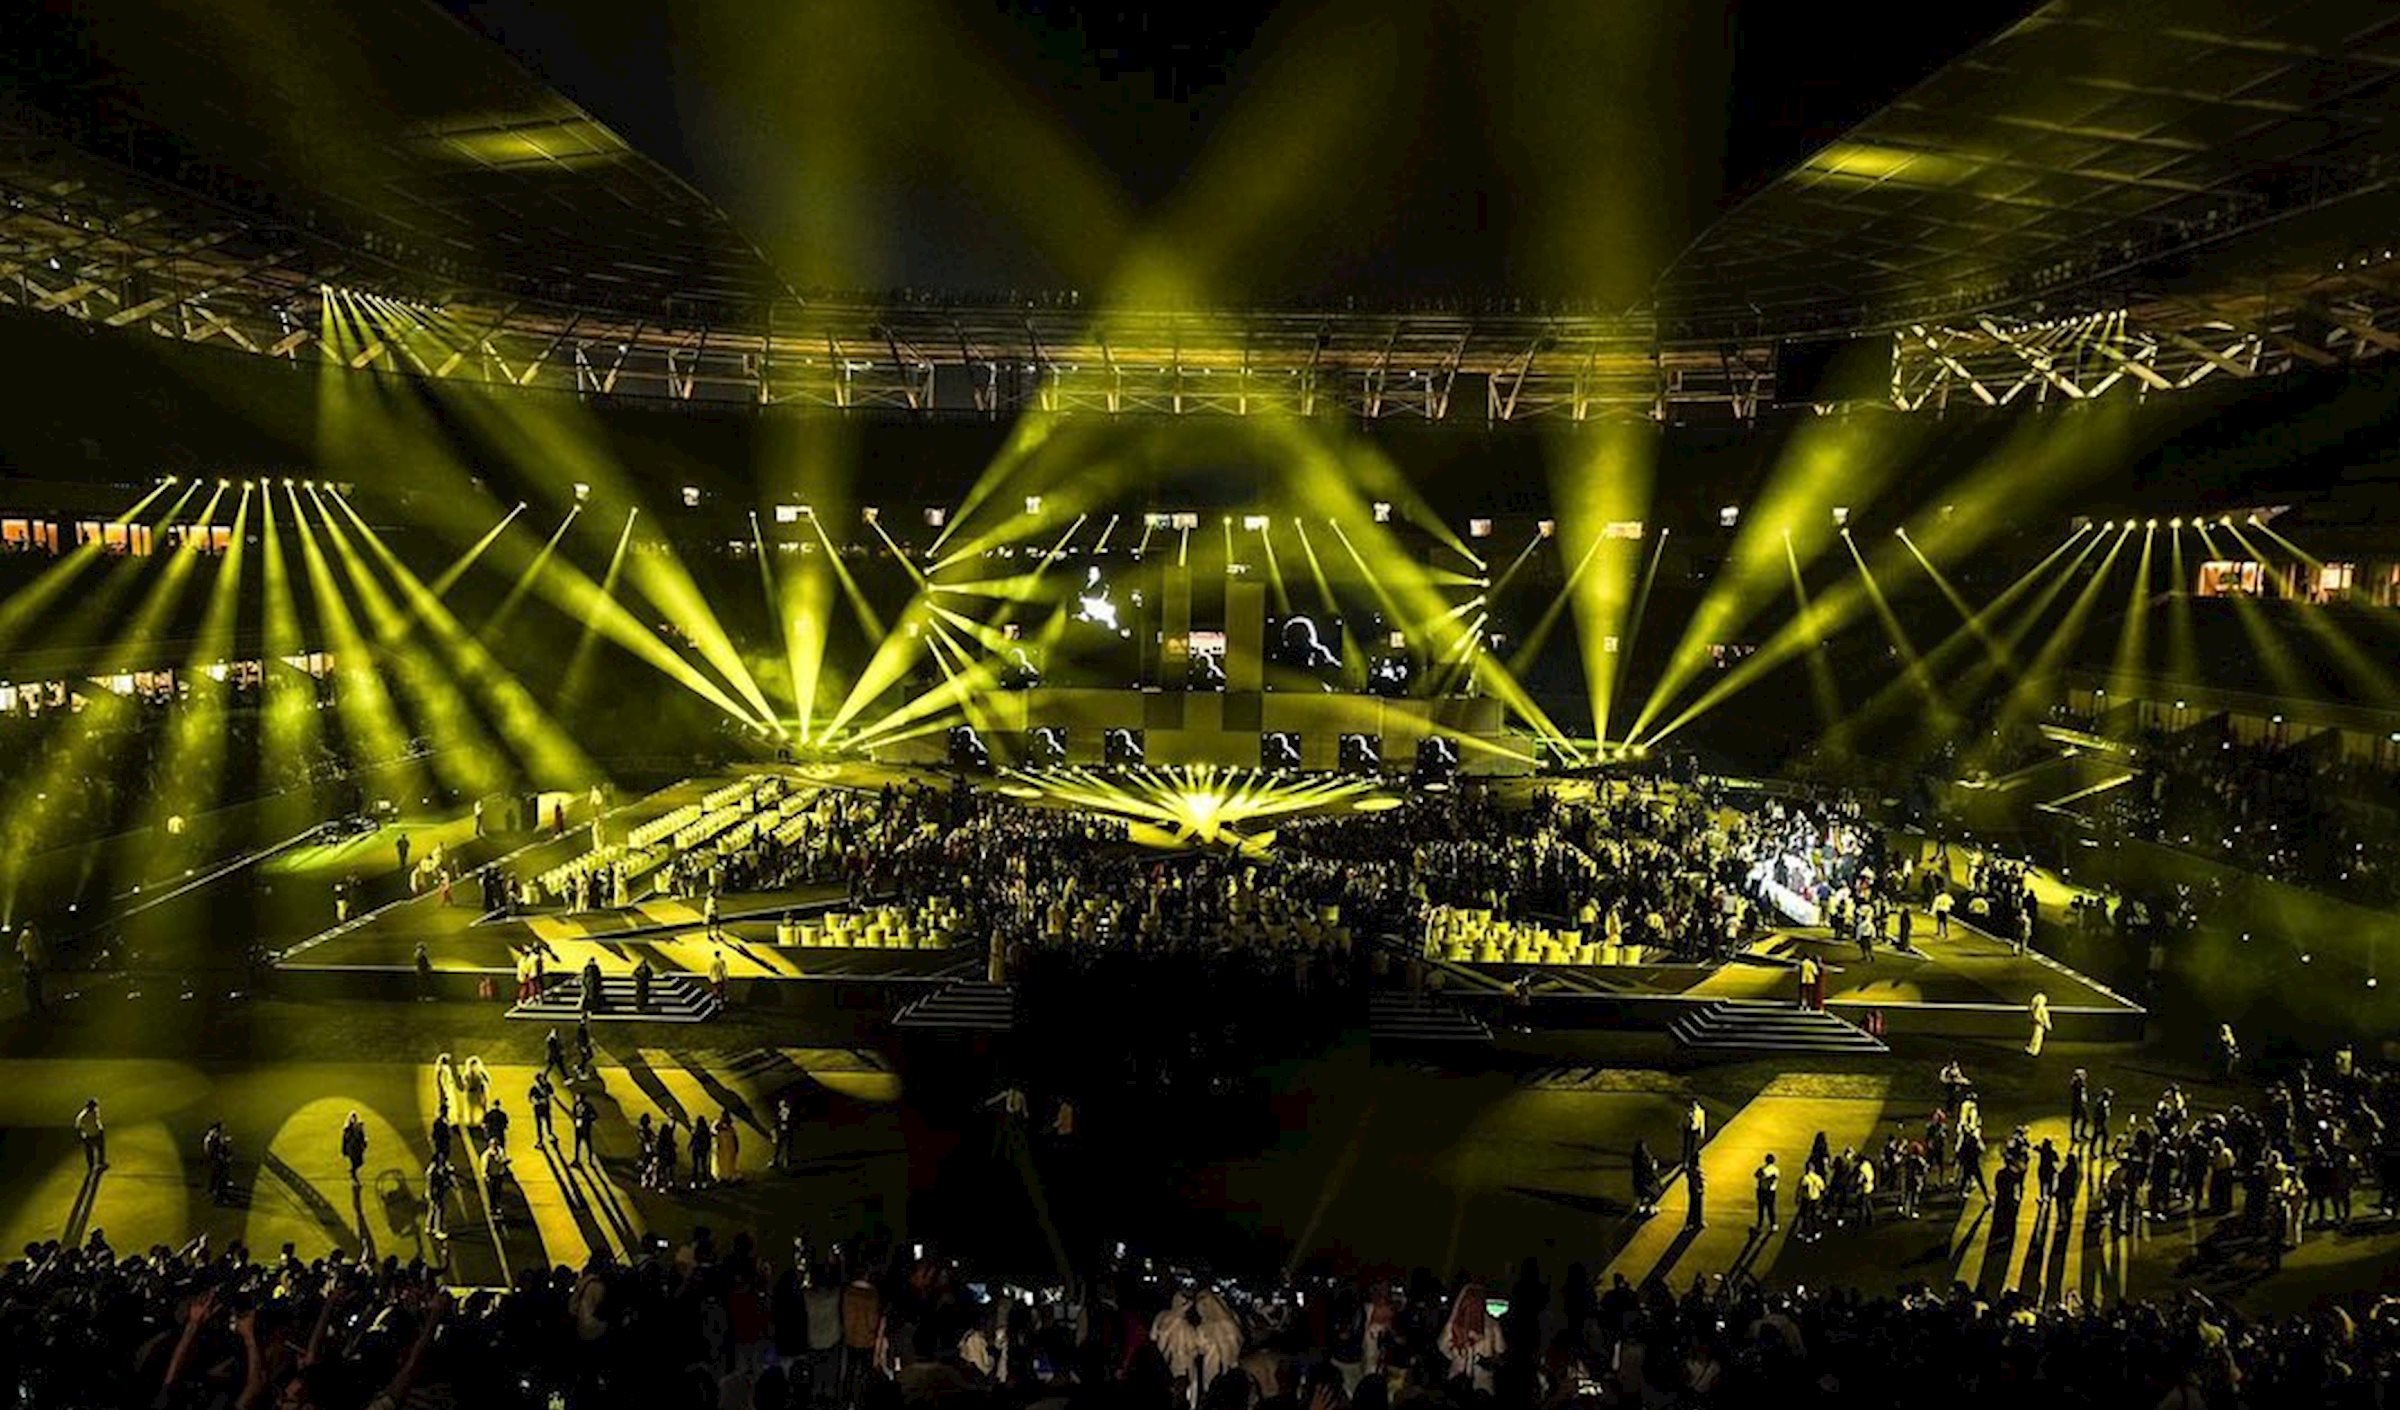 PRG Middle East and PRG France came together to deliver the spectacle for Qatar Creates providing audio, video, and lighting for this event.